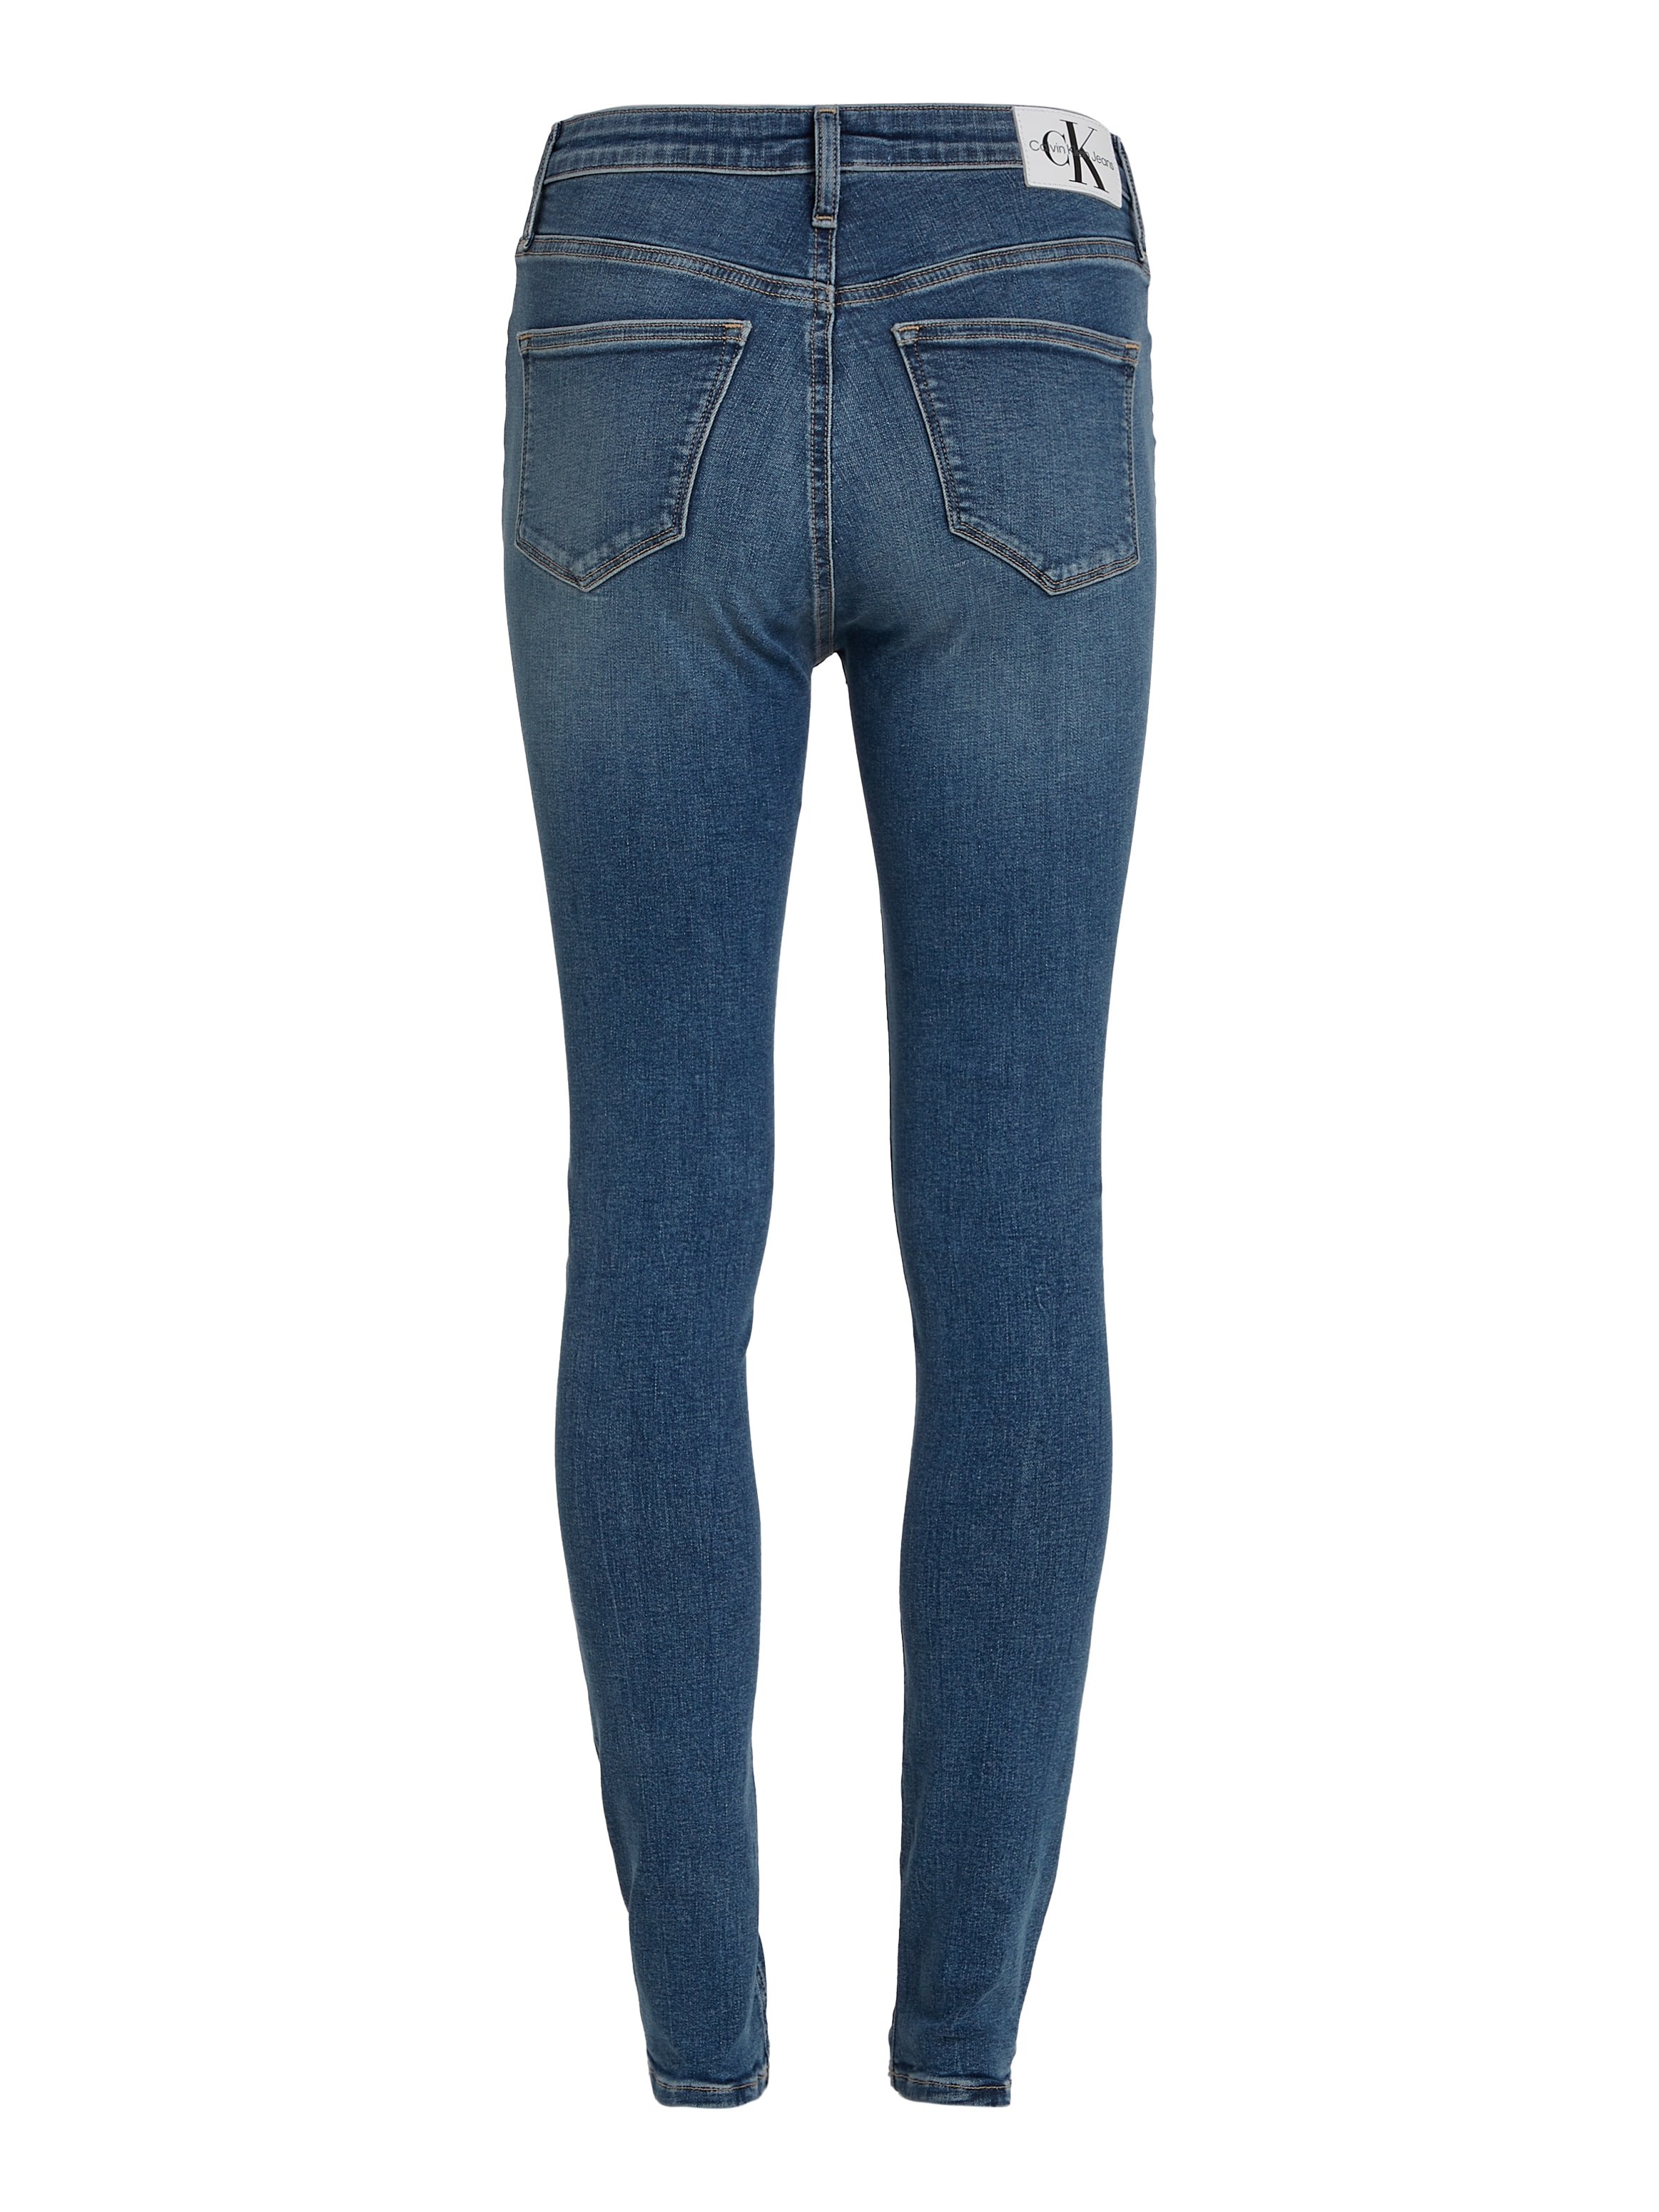 Calvin Klein Jeans Skinny-fit-Jeans »HIGH RISE SKINNY«, im 5-Pocket-Style